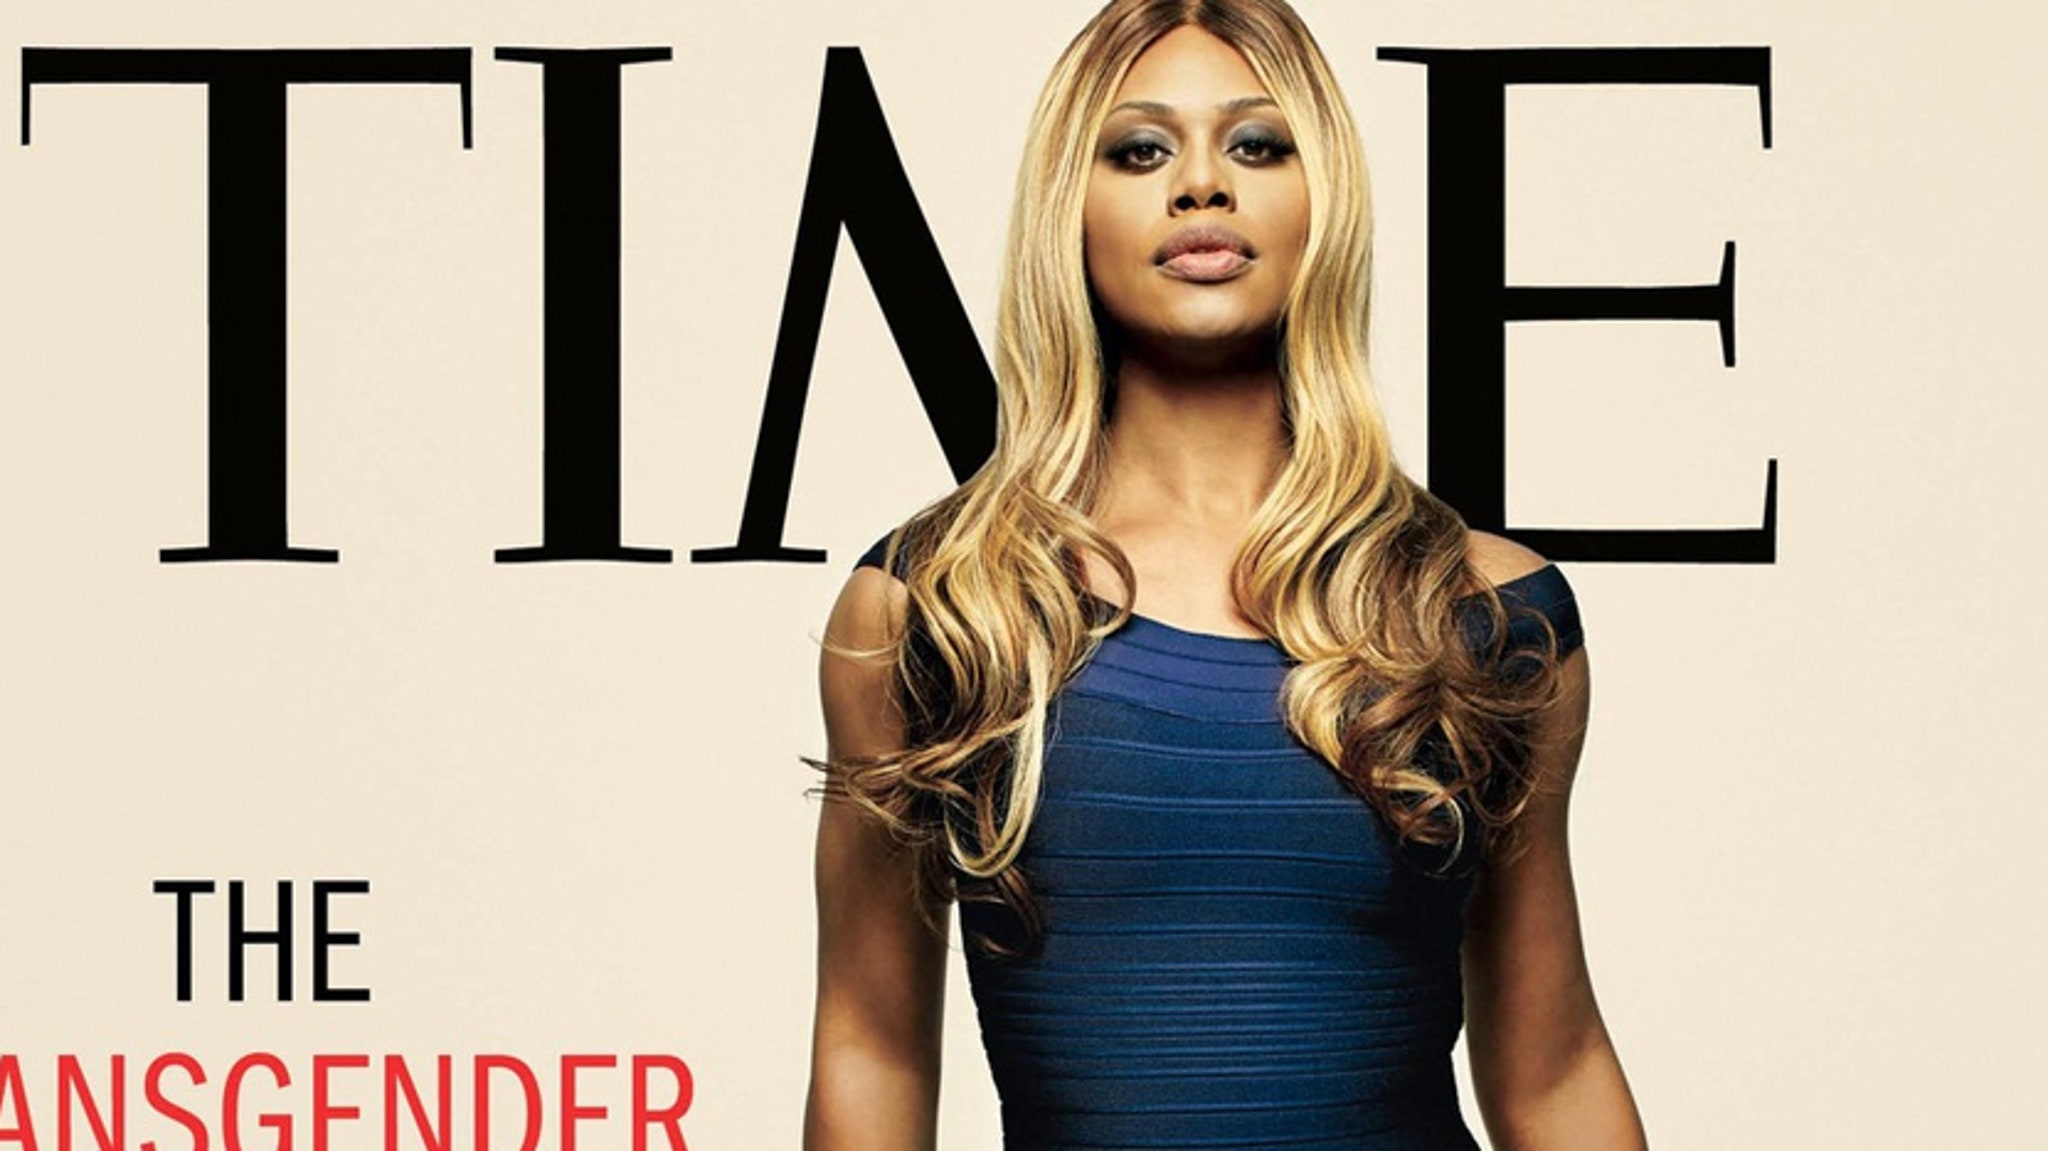 Oitnb Star Laverne Cox Covers Time Magazine Talks About